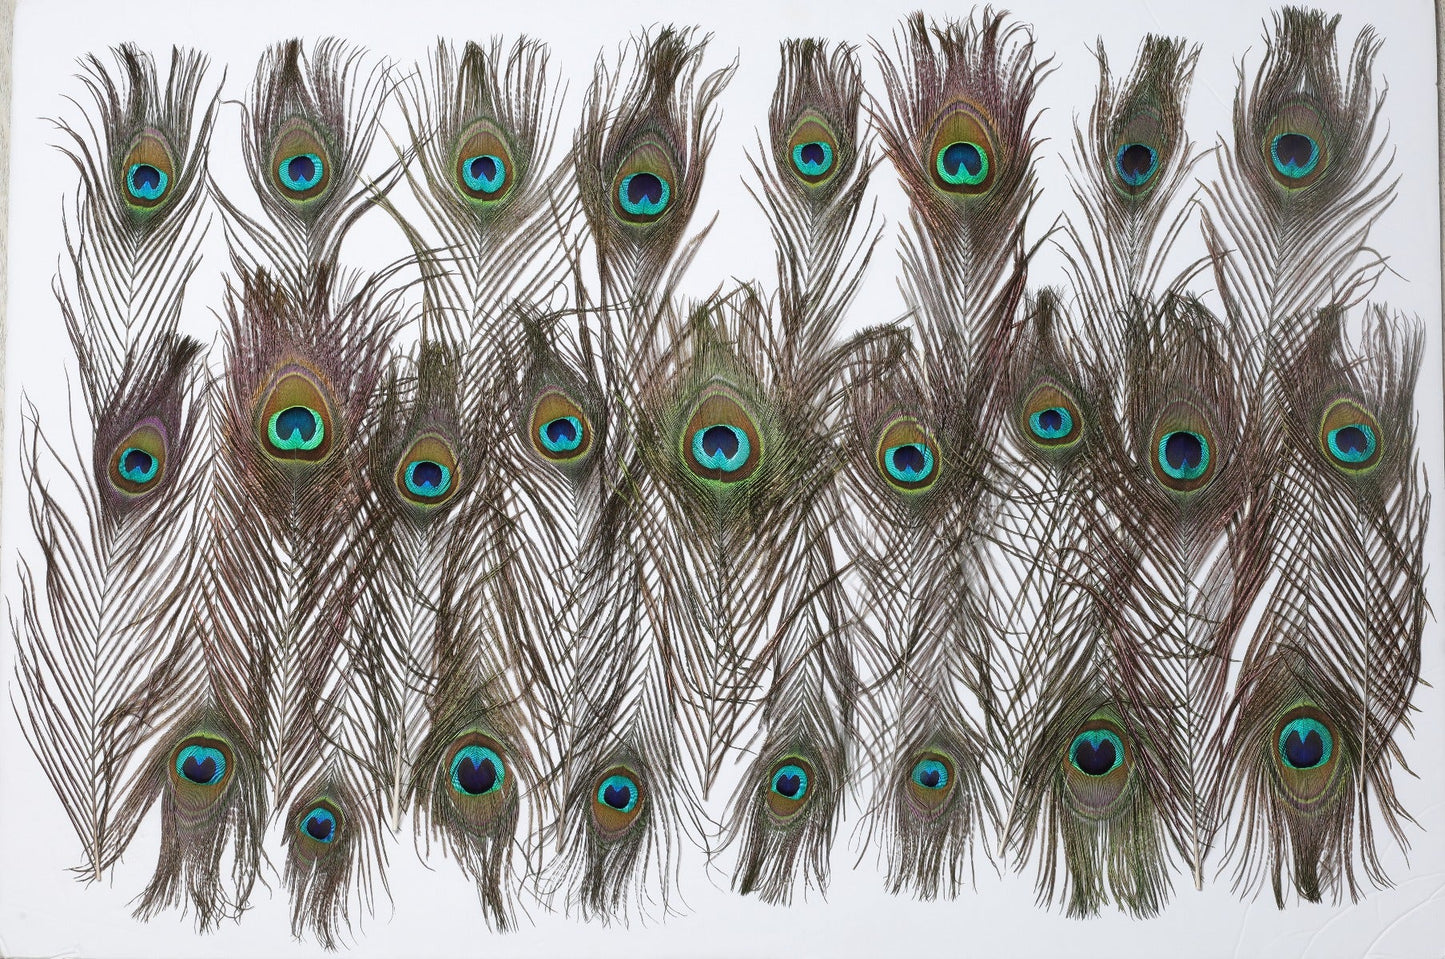 Peacock Feathers for Sale